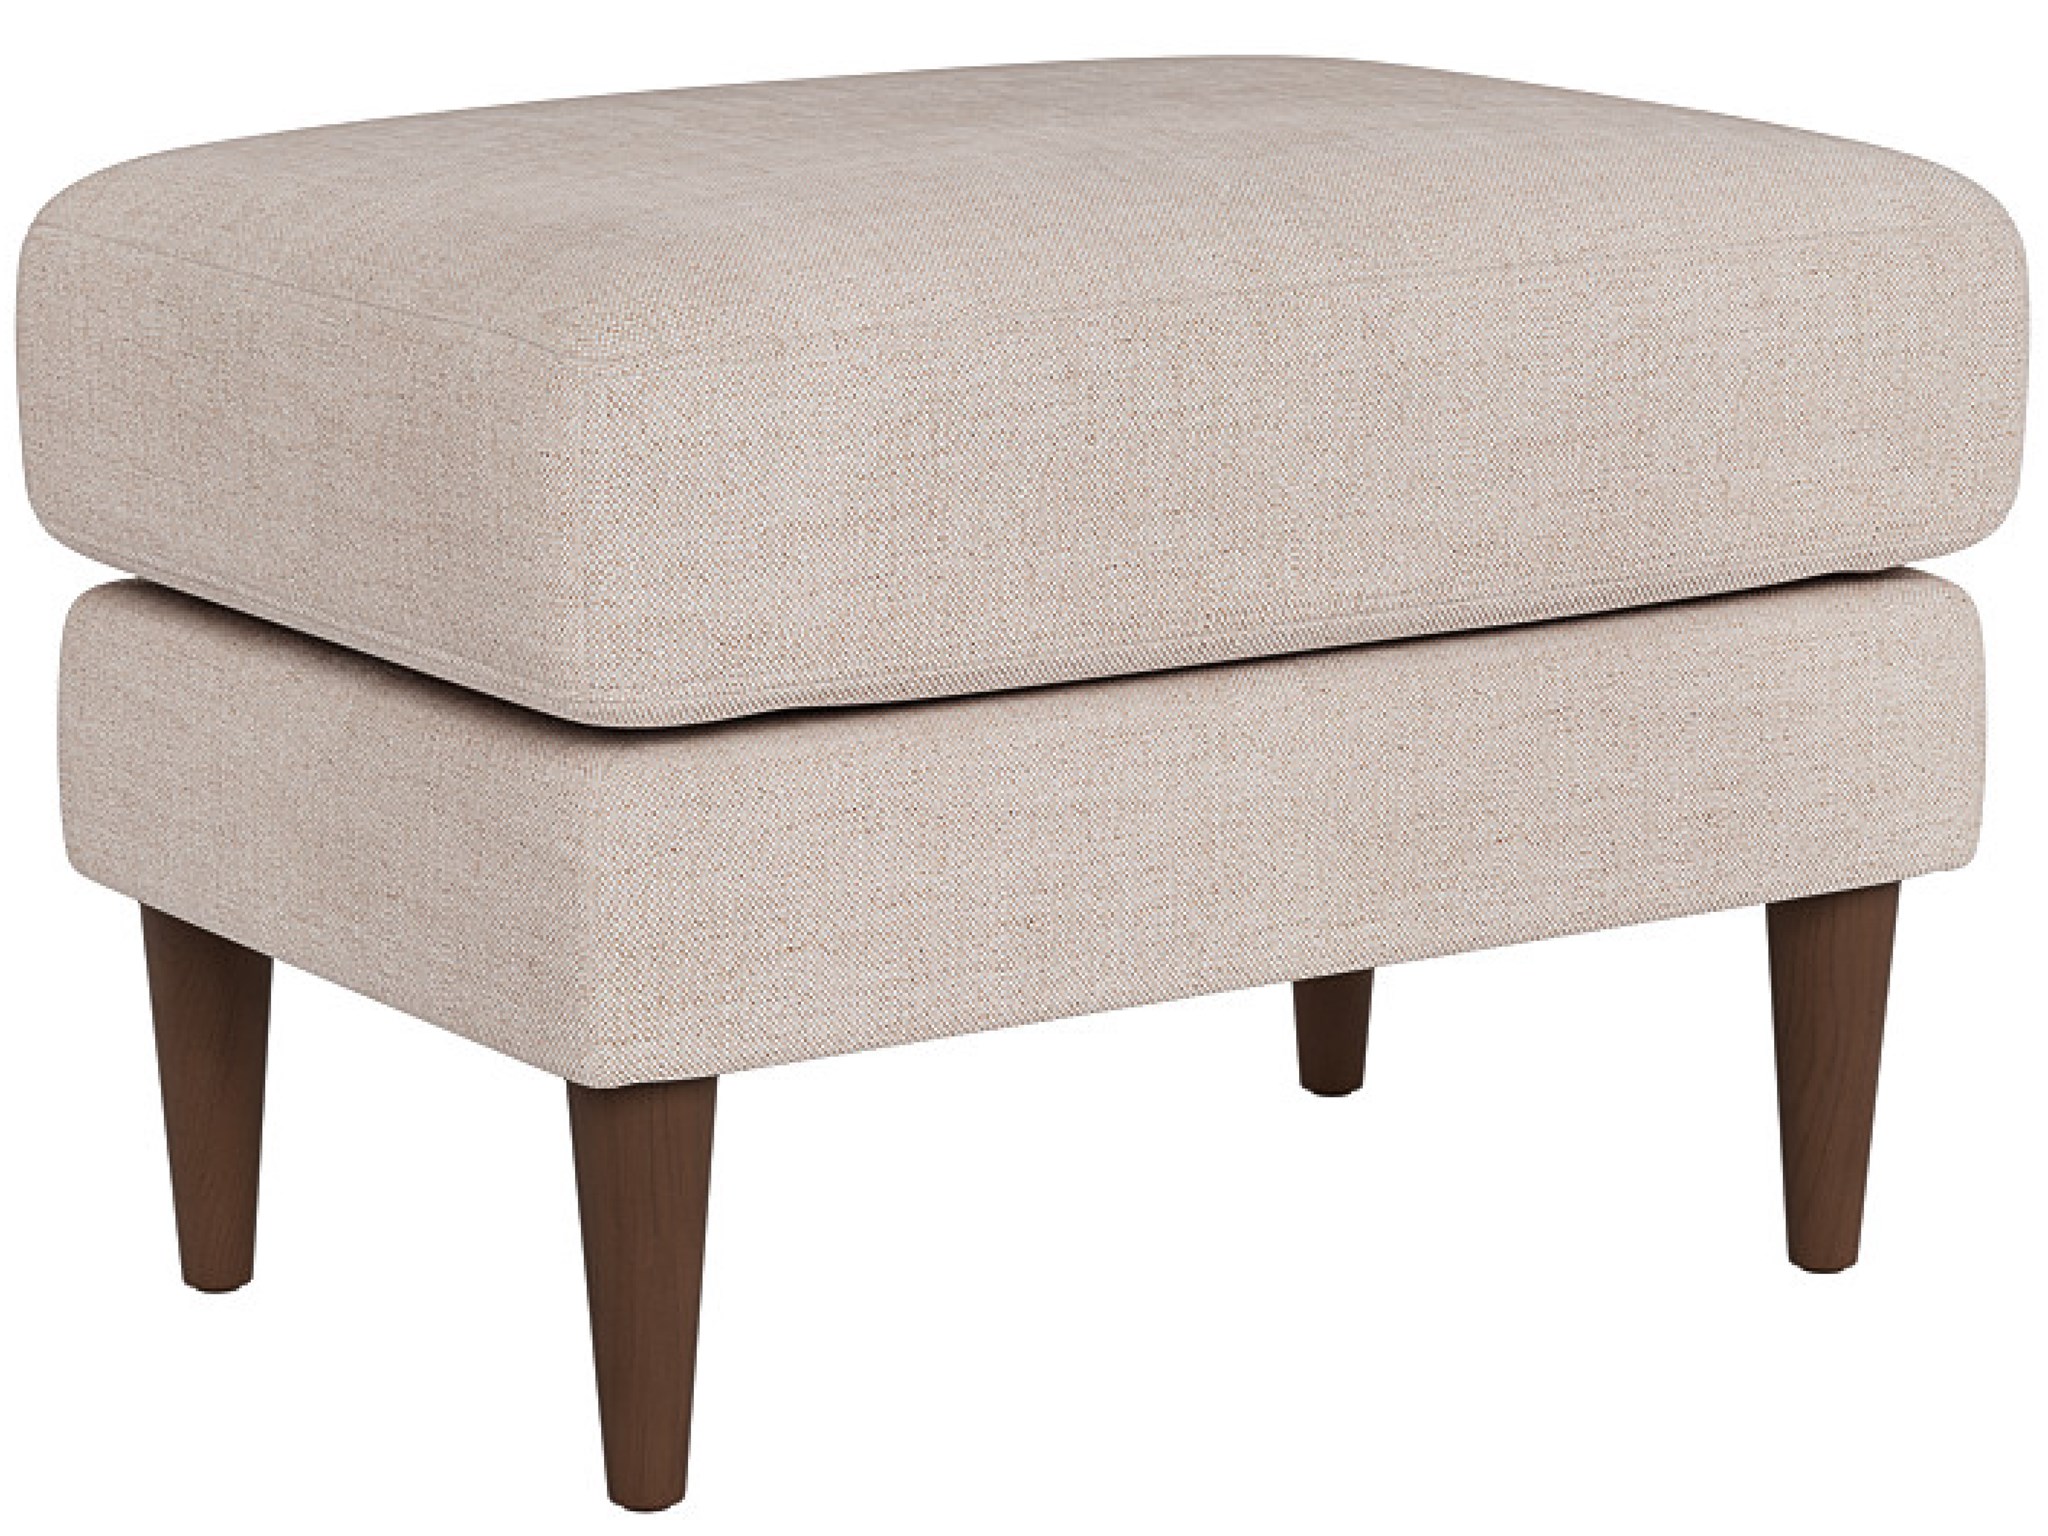 Brentwood Ottoman - Special Order